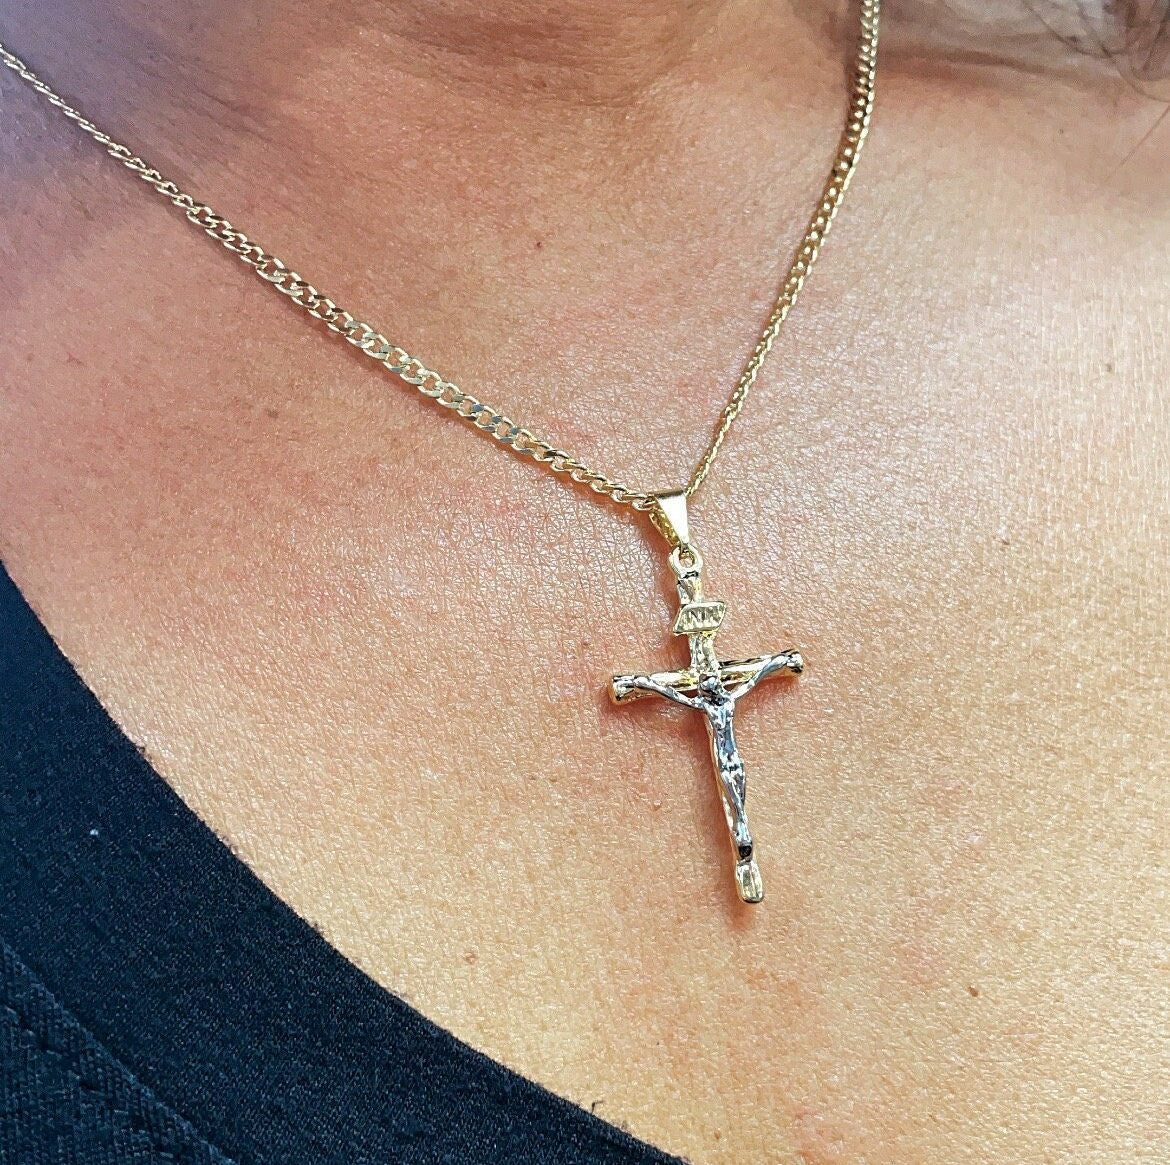 18k Gold Layered Two Tone Crucifix Cross Featuring Image of Jesus Christ in